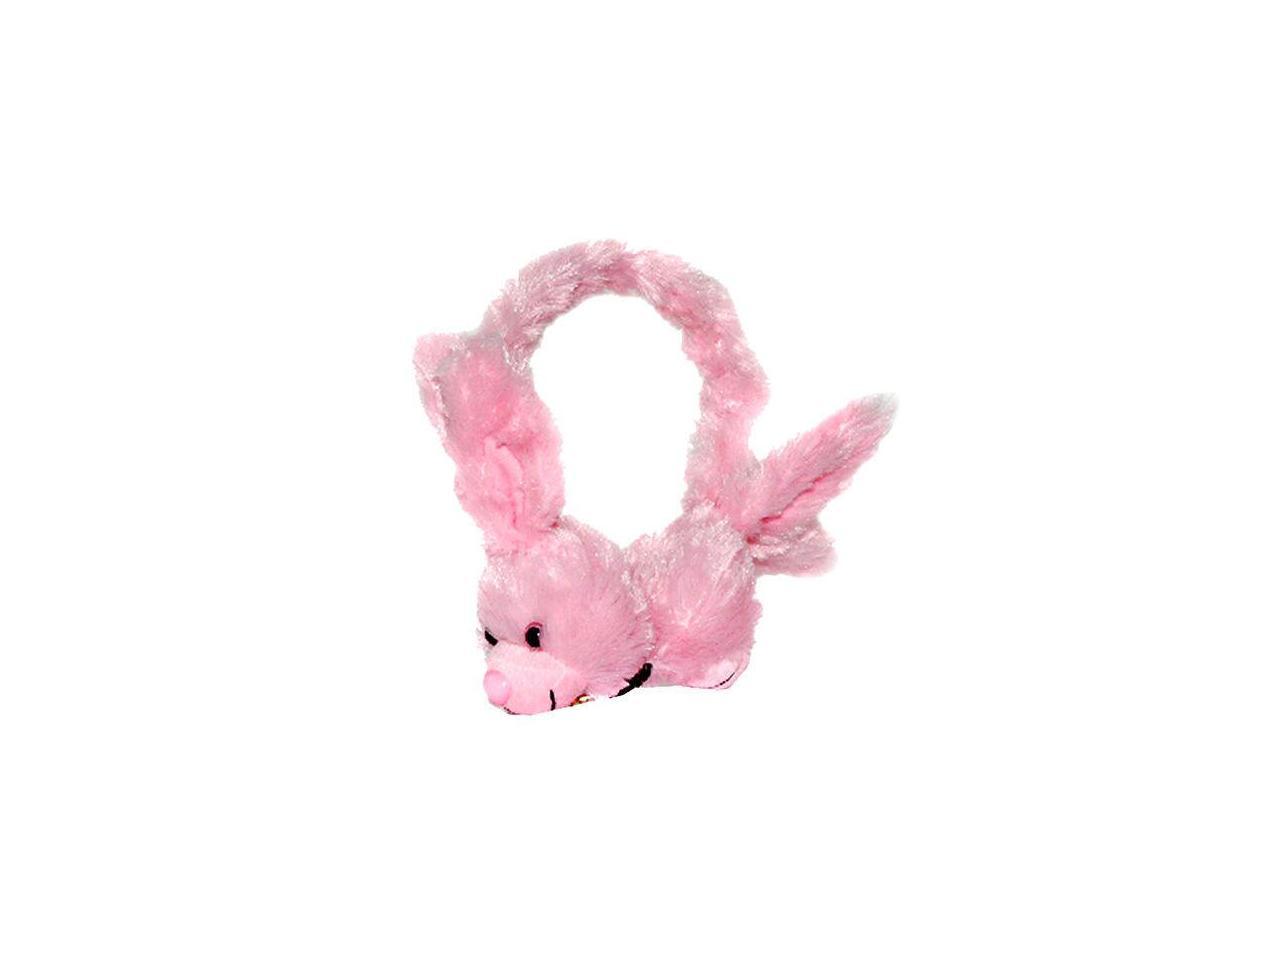 Dairle P02 Bunny Cute Animal Kids Music Headphones with Adjustable Headband for Smartphone, Mp4, PC, Laptop (No Microphone) -Pink